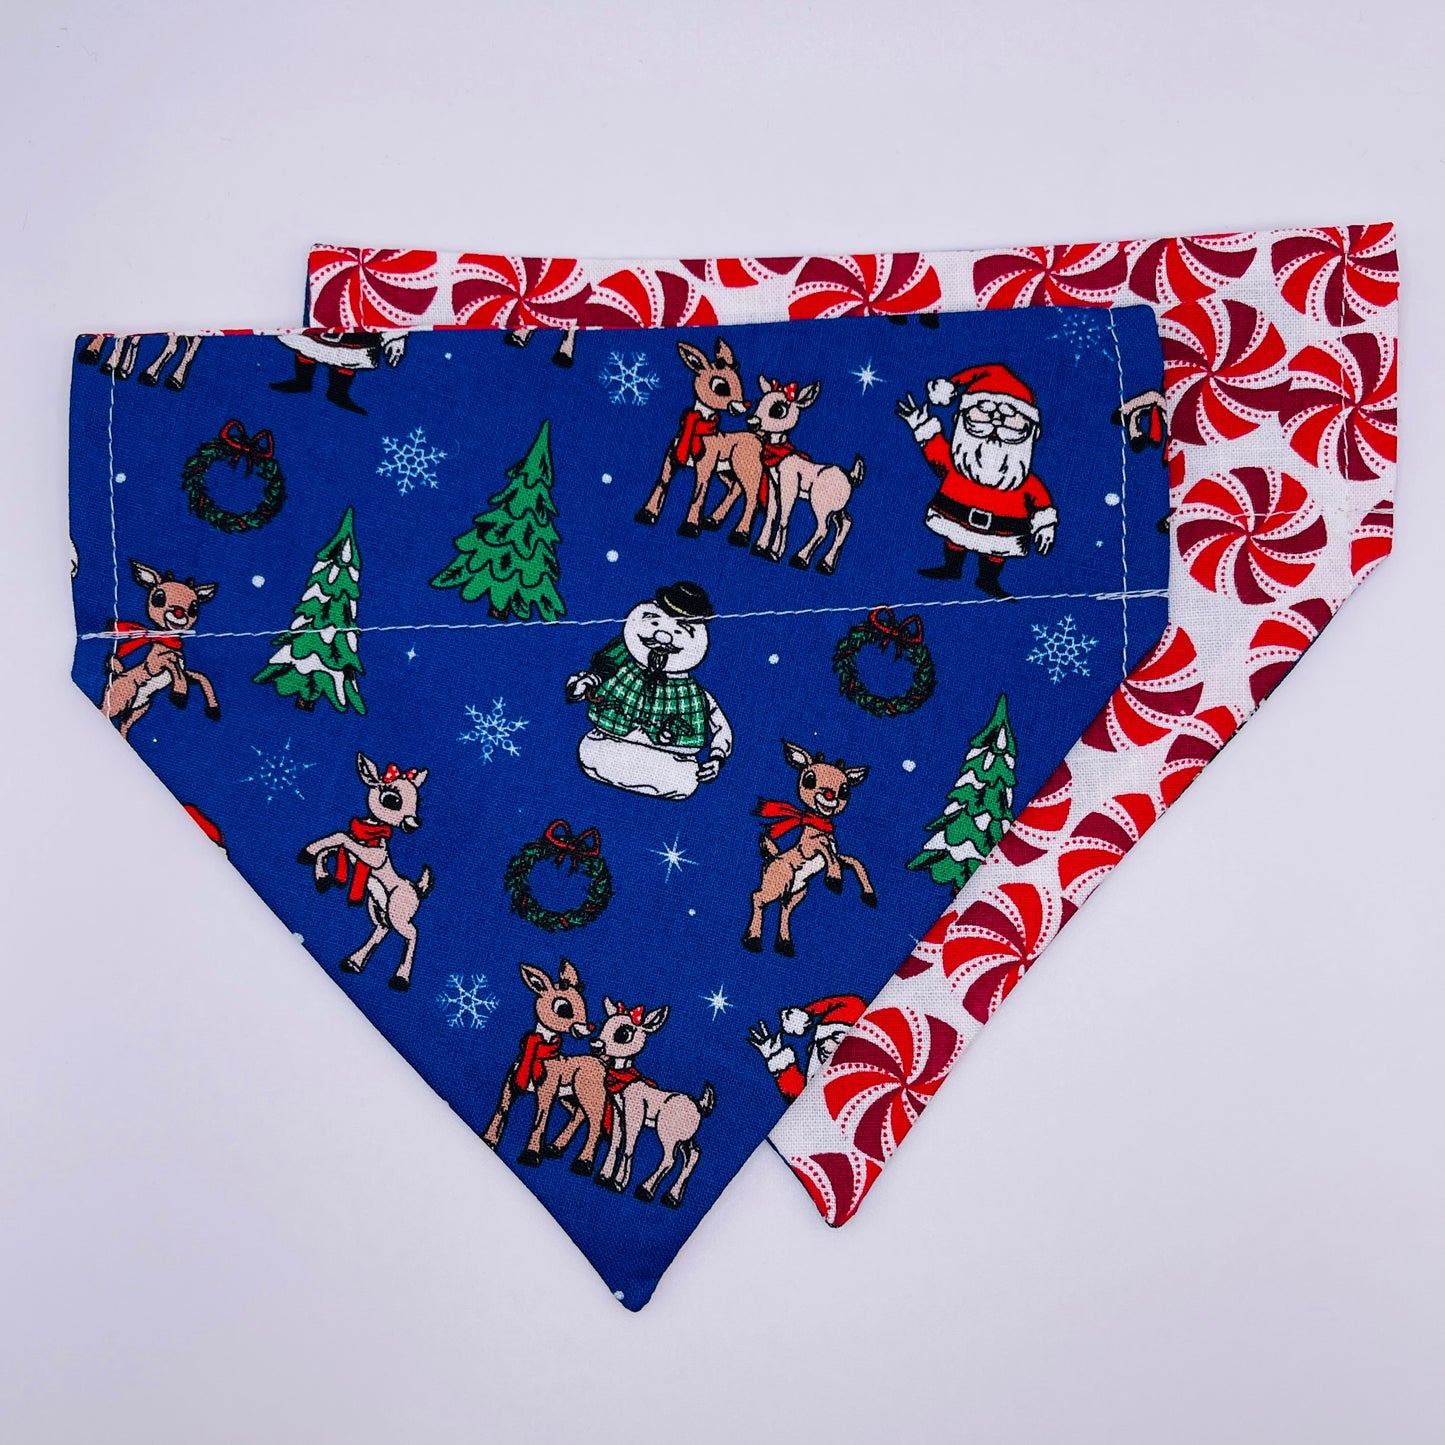 Rudolph The Red Nose Reindeer Bandana